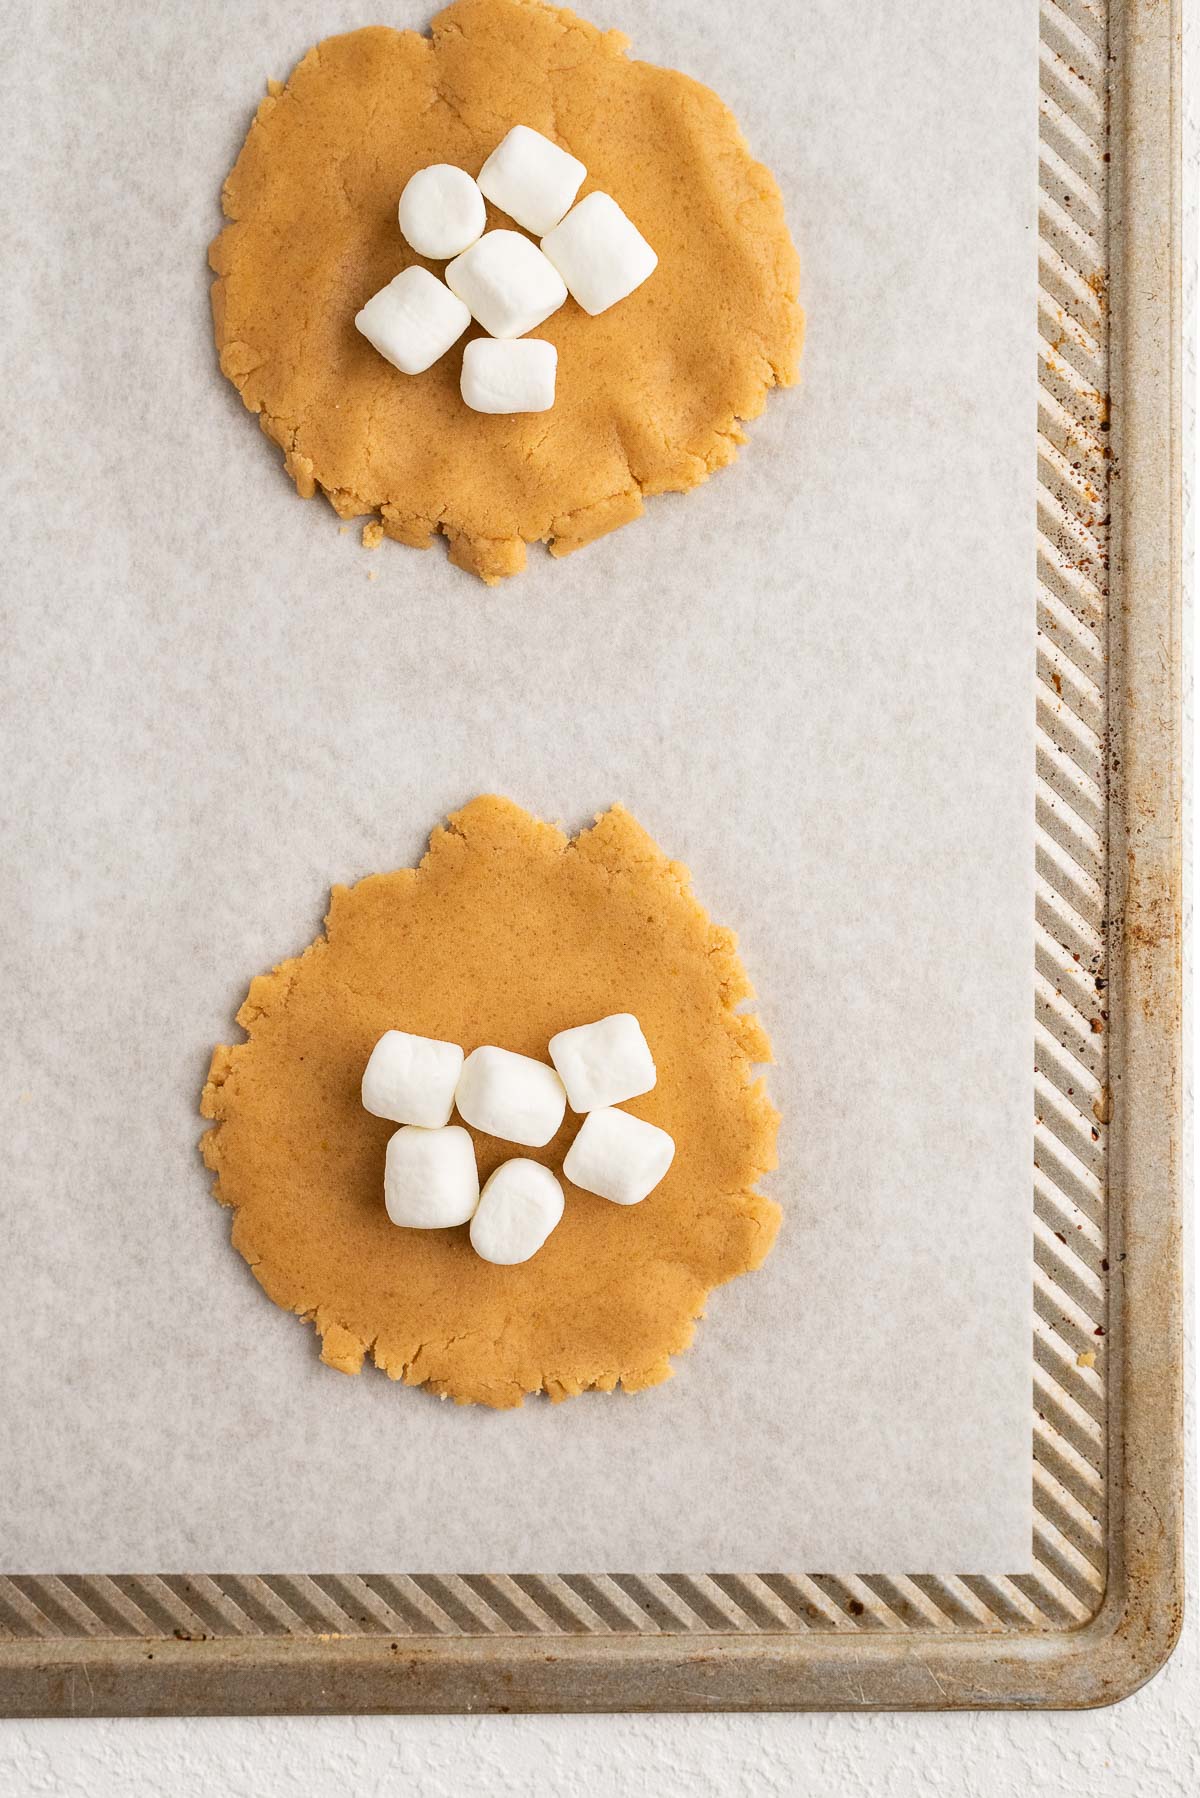 Six mini marshmallows placed on fluffernutter cookie discs on parchment paper lined baking sheet.